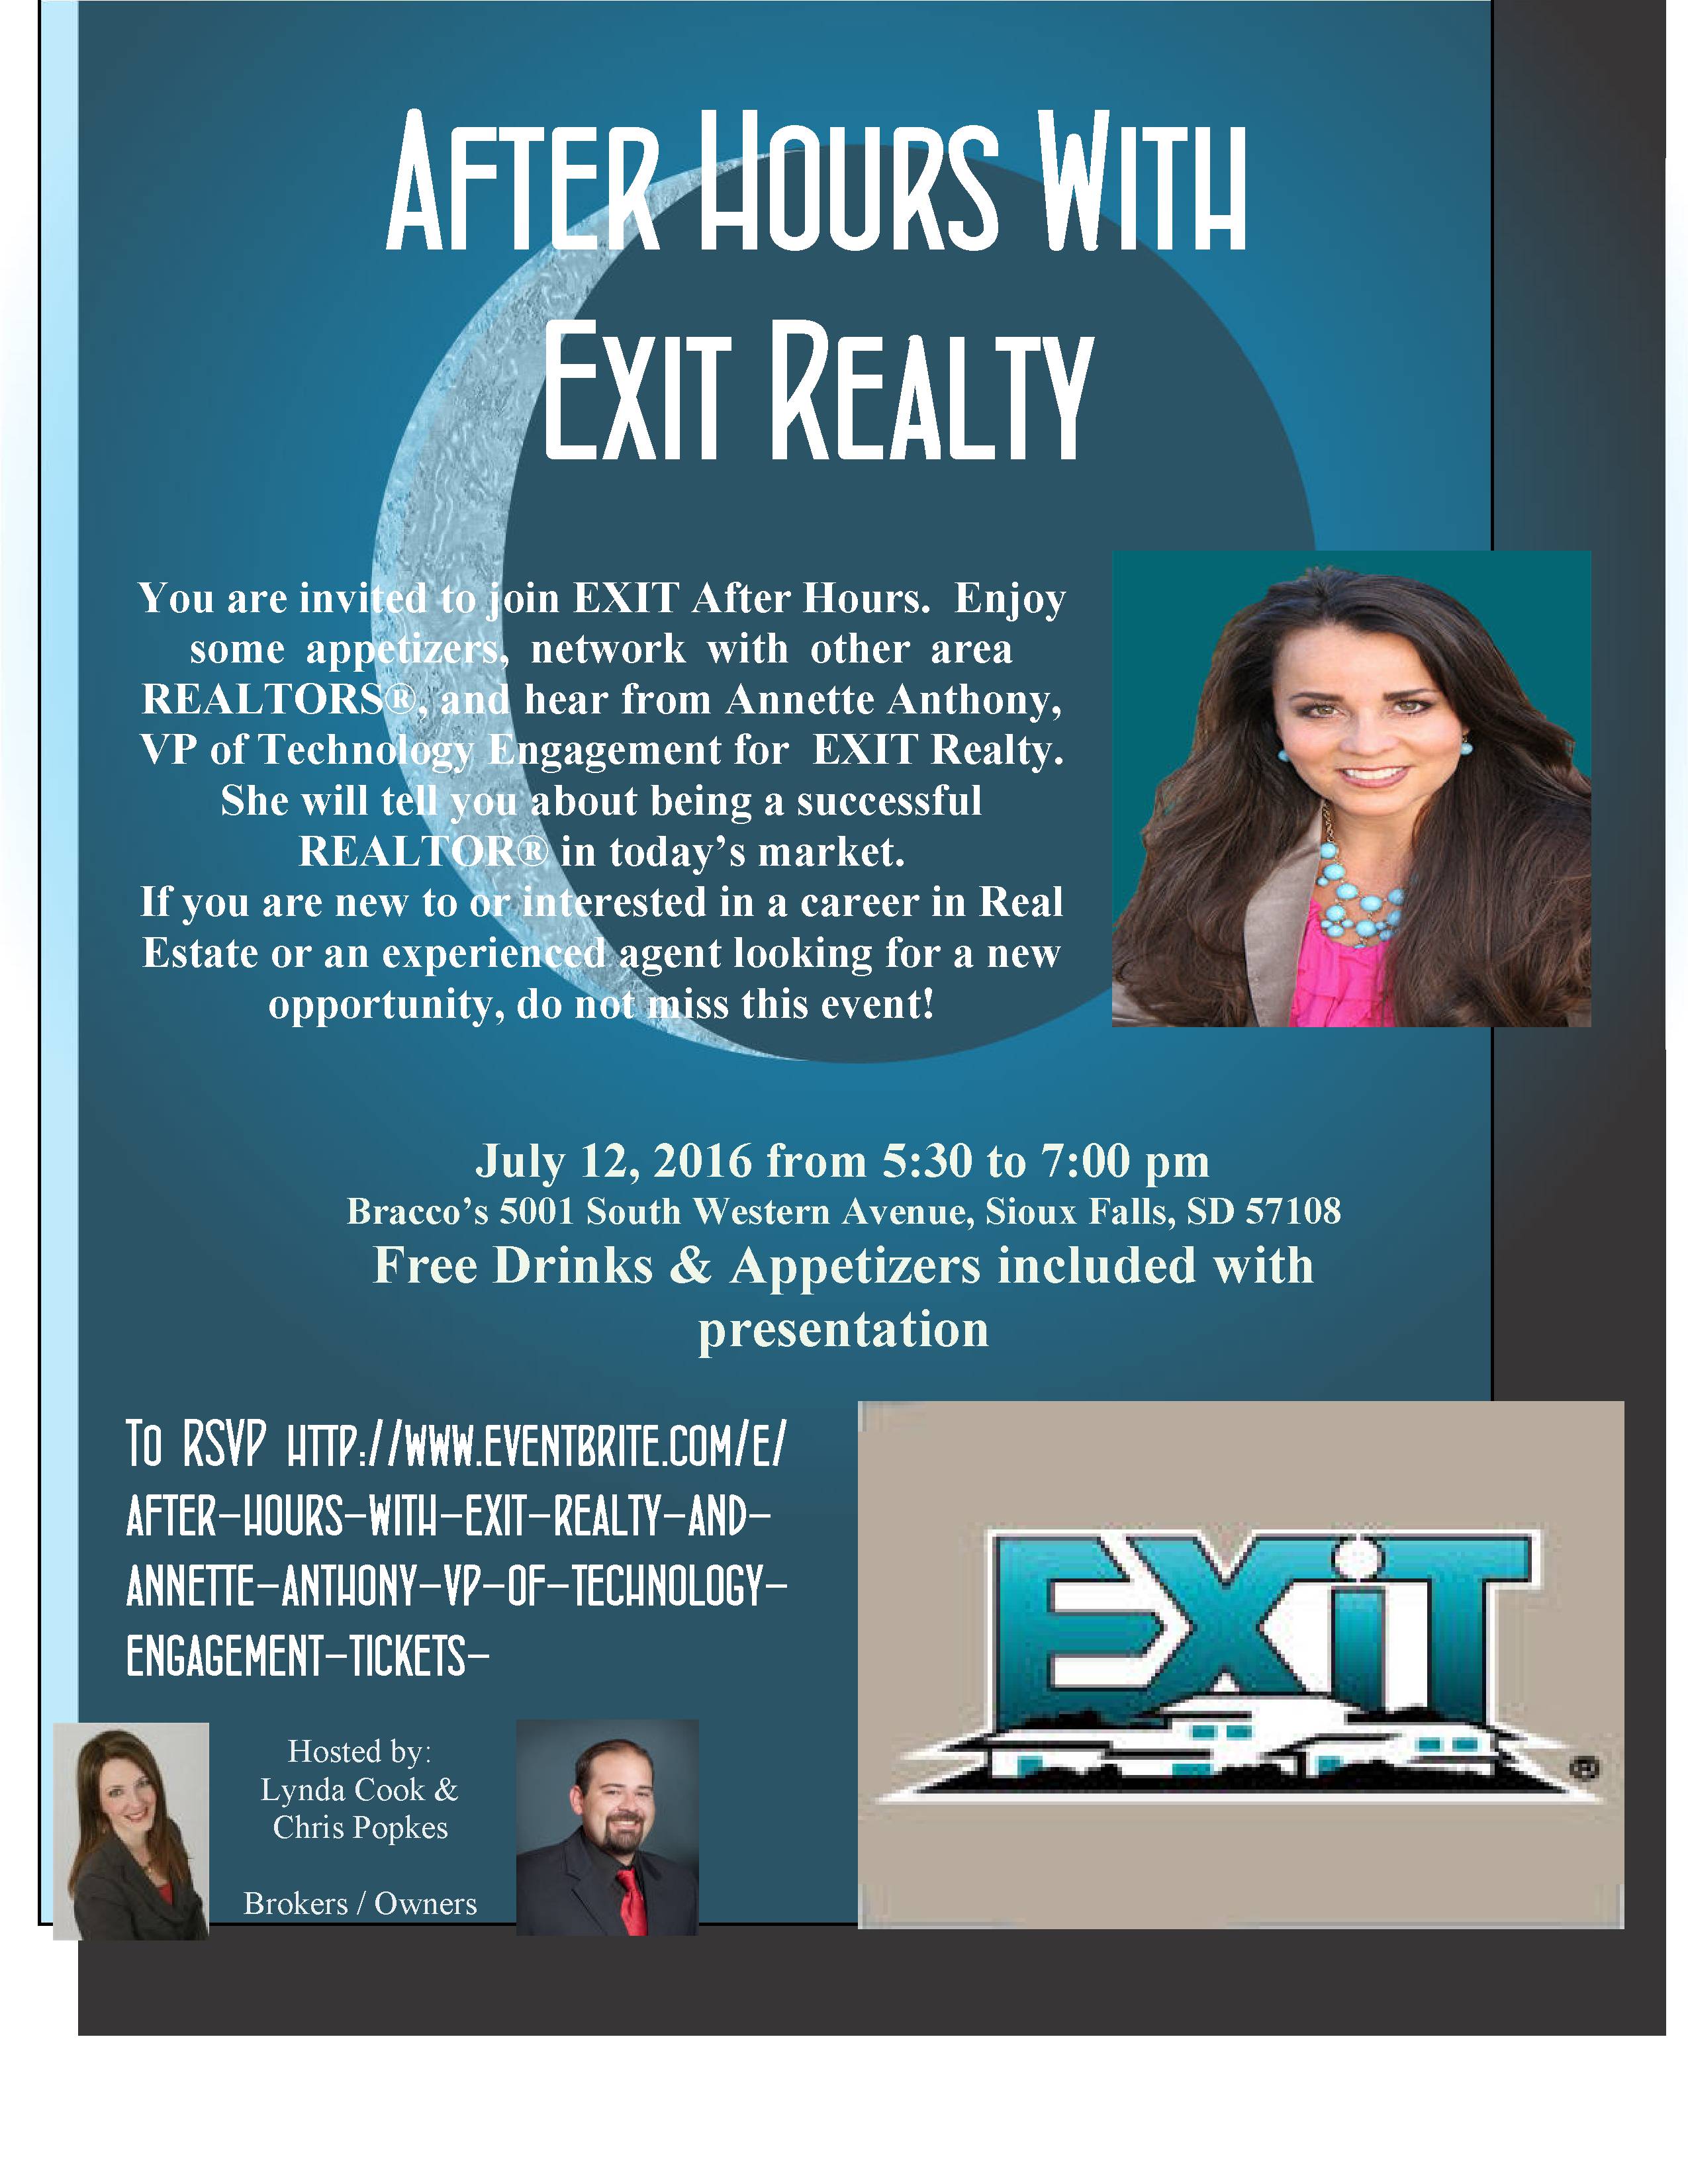 After Hours with EXIT Realty July 12th from 5:30pm- 7:00pm!